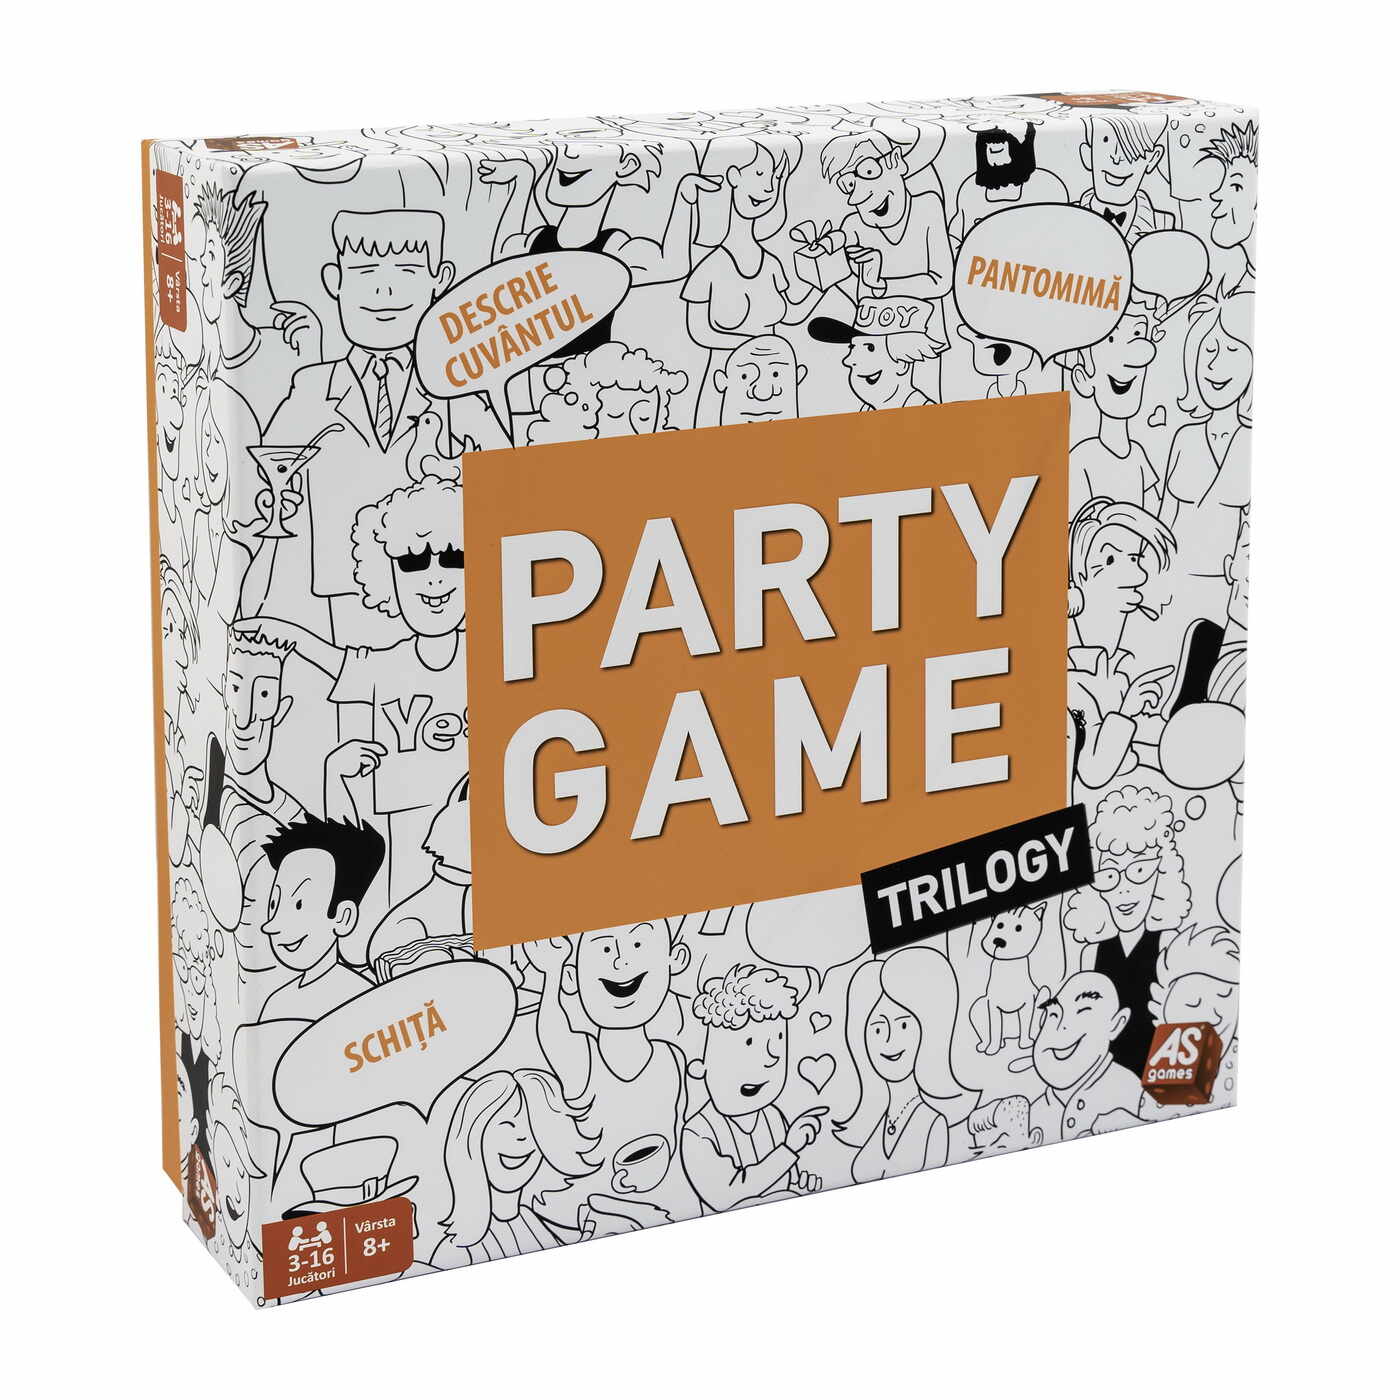 Party Game Trilogy | As games